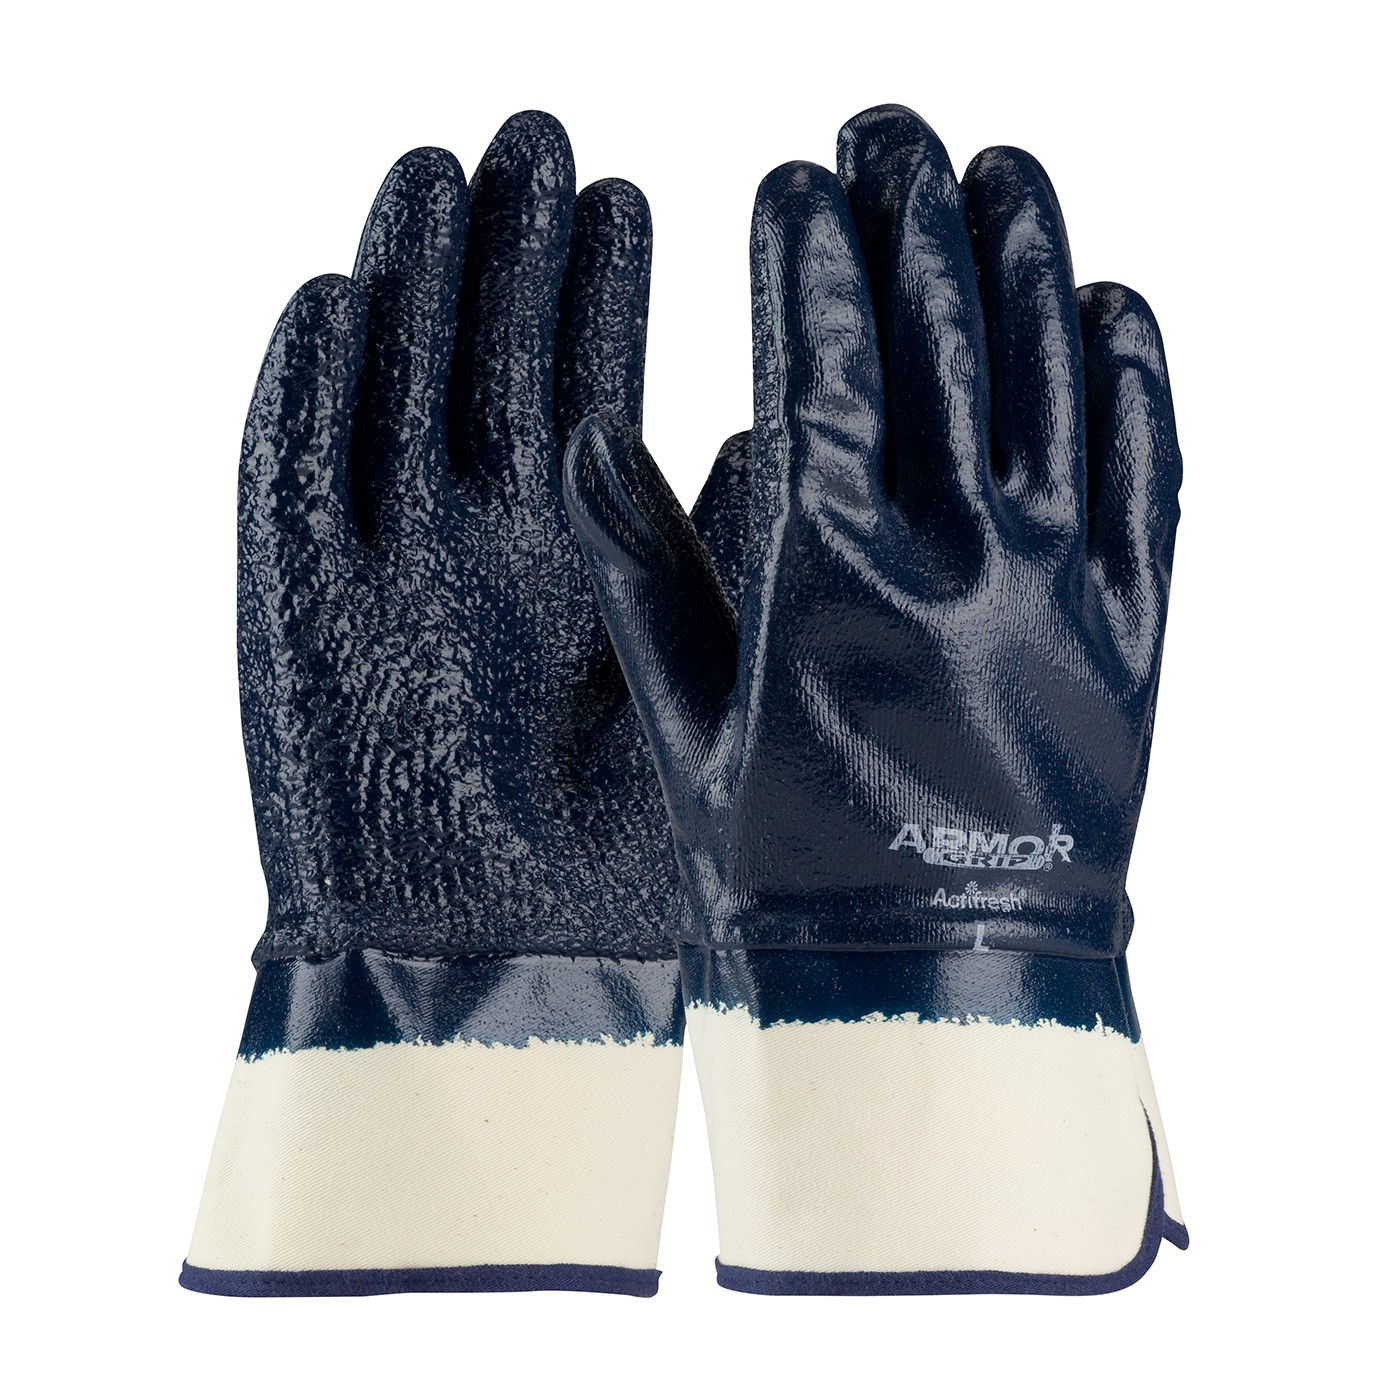 ArmorGrip® Nitrile Dipped Glove with Terry Cloth Liner and Heavy Weight Rough Grip on Full Hand - Plasticized Safety Cuff  (#56-3147)